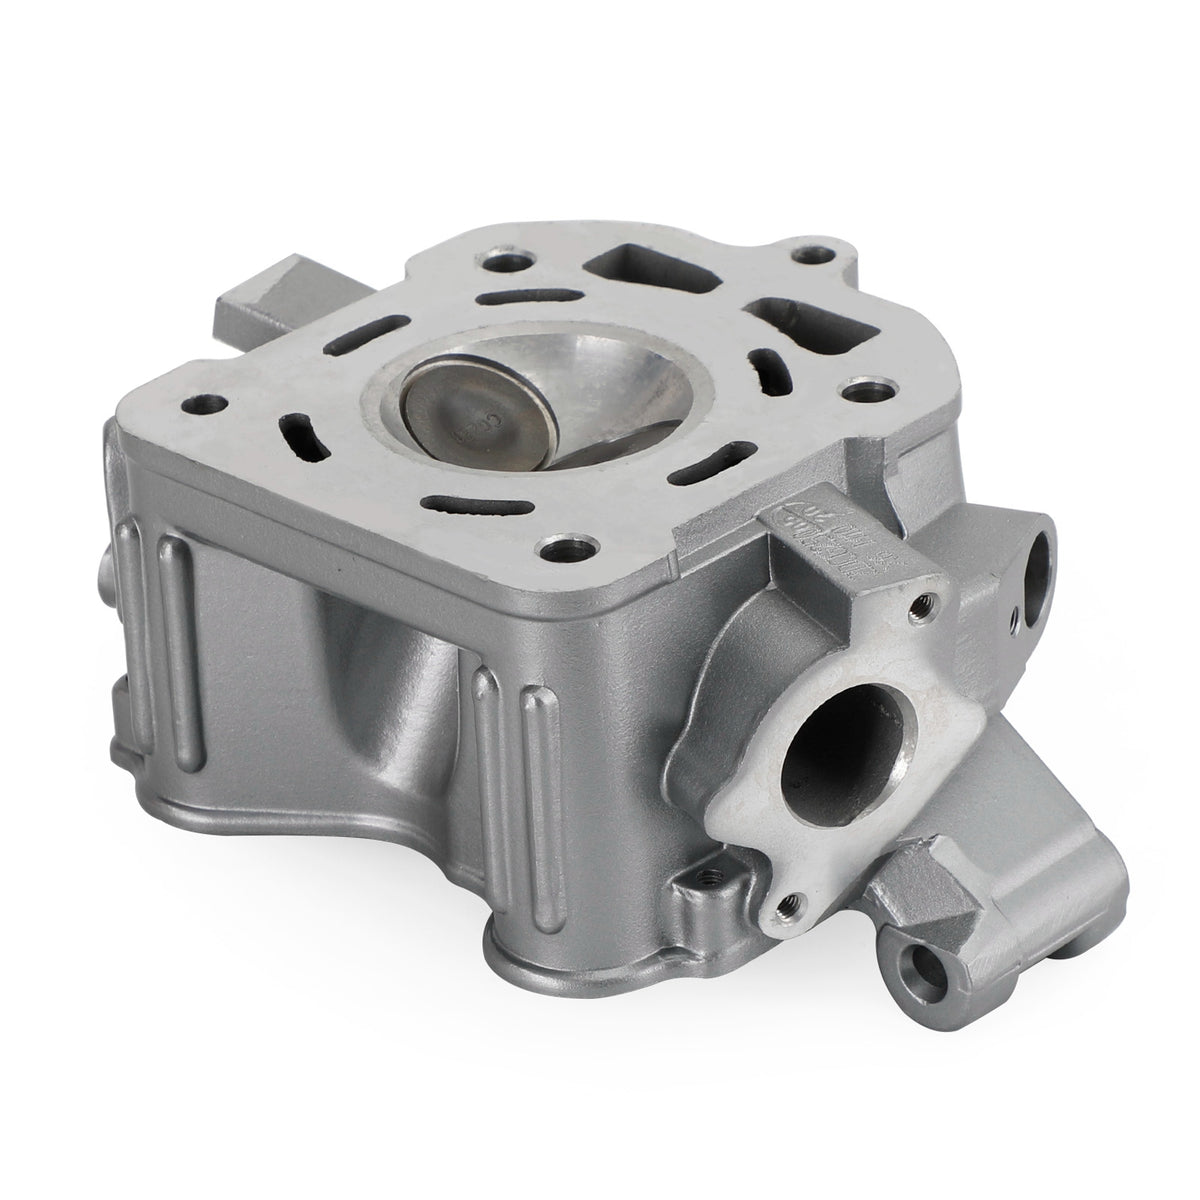 Engine Cylinder Head For Zongshen Loncin CG250 167FMM 250CC Water Cooled ATV